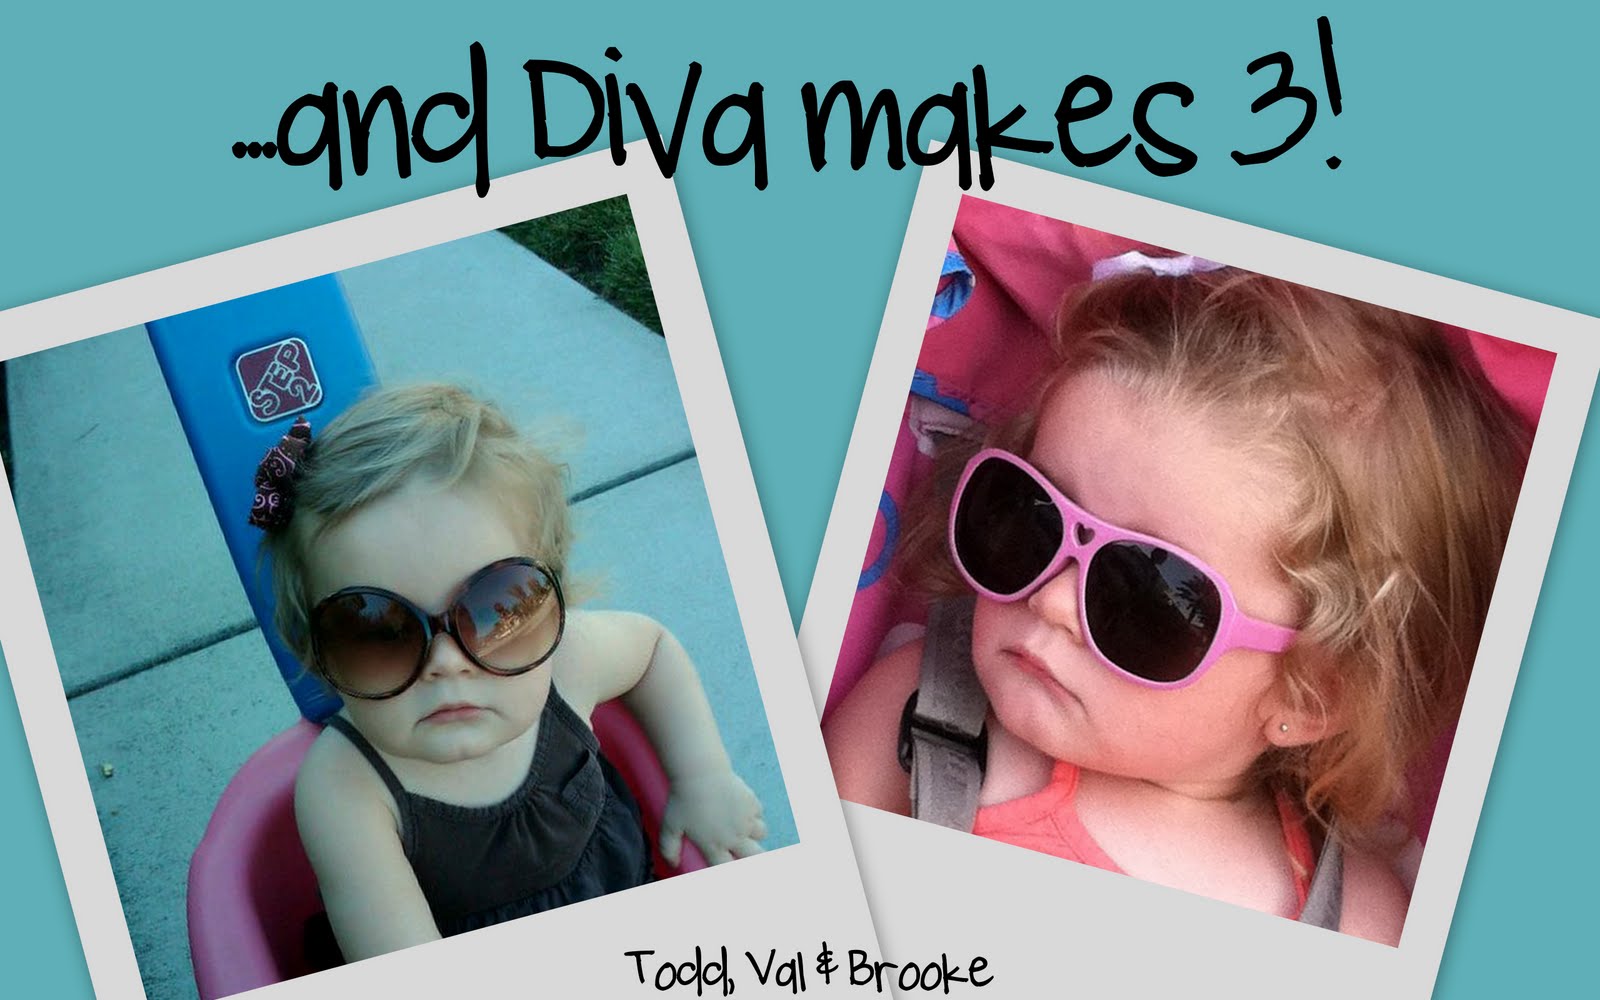 ... and the Diva makes 3!